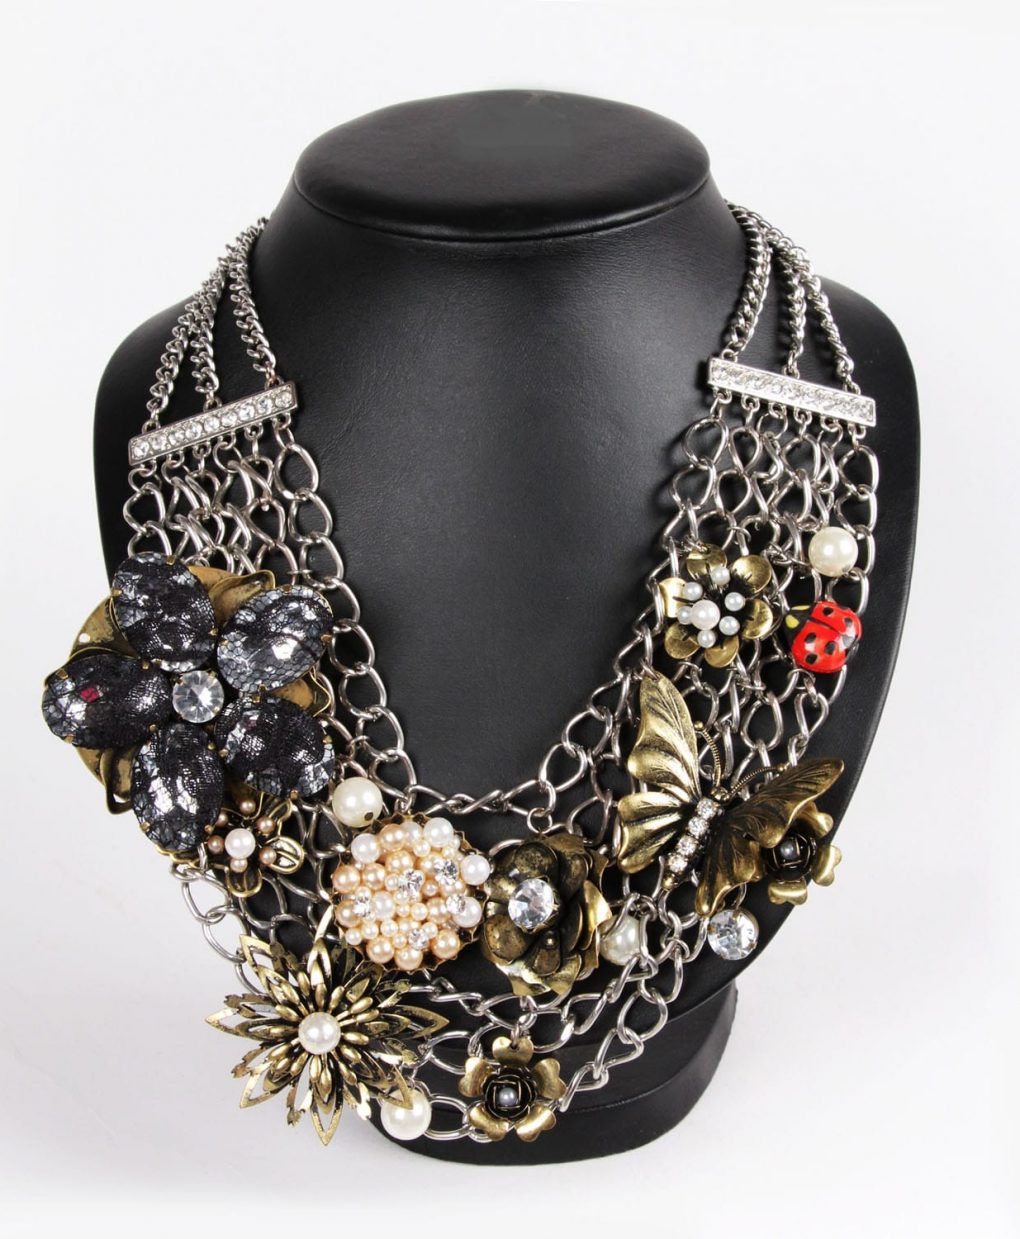 Ladybird and Flowers Statement Necklace